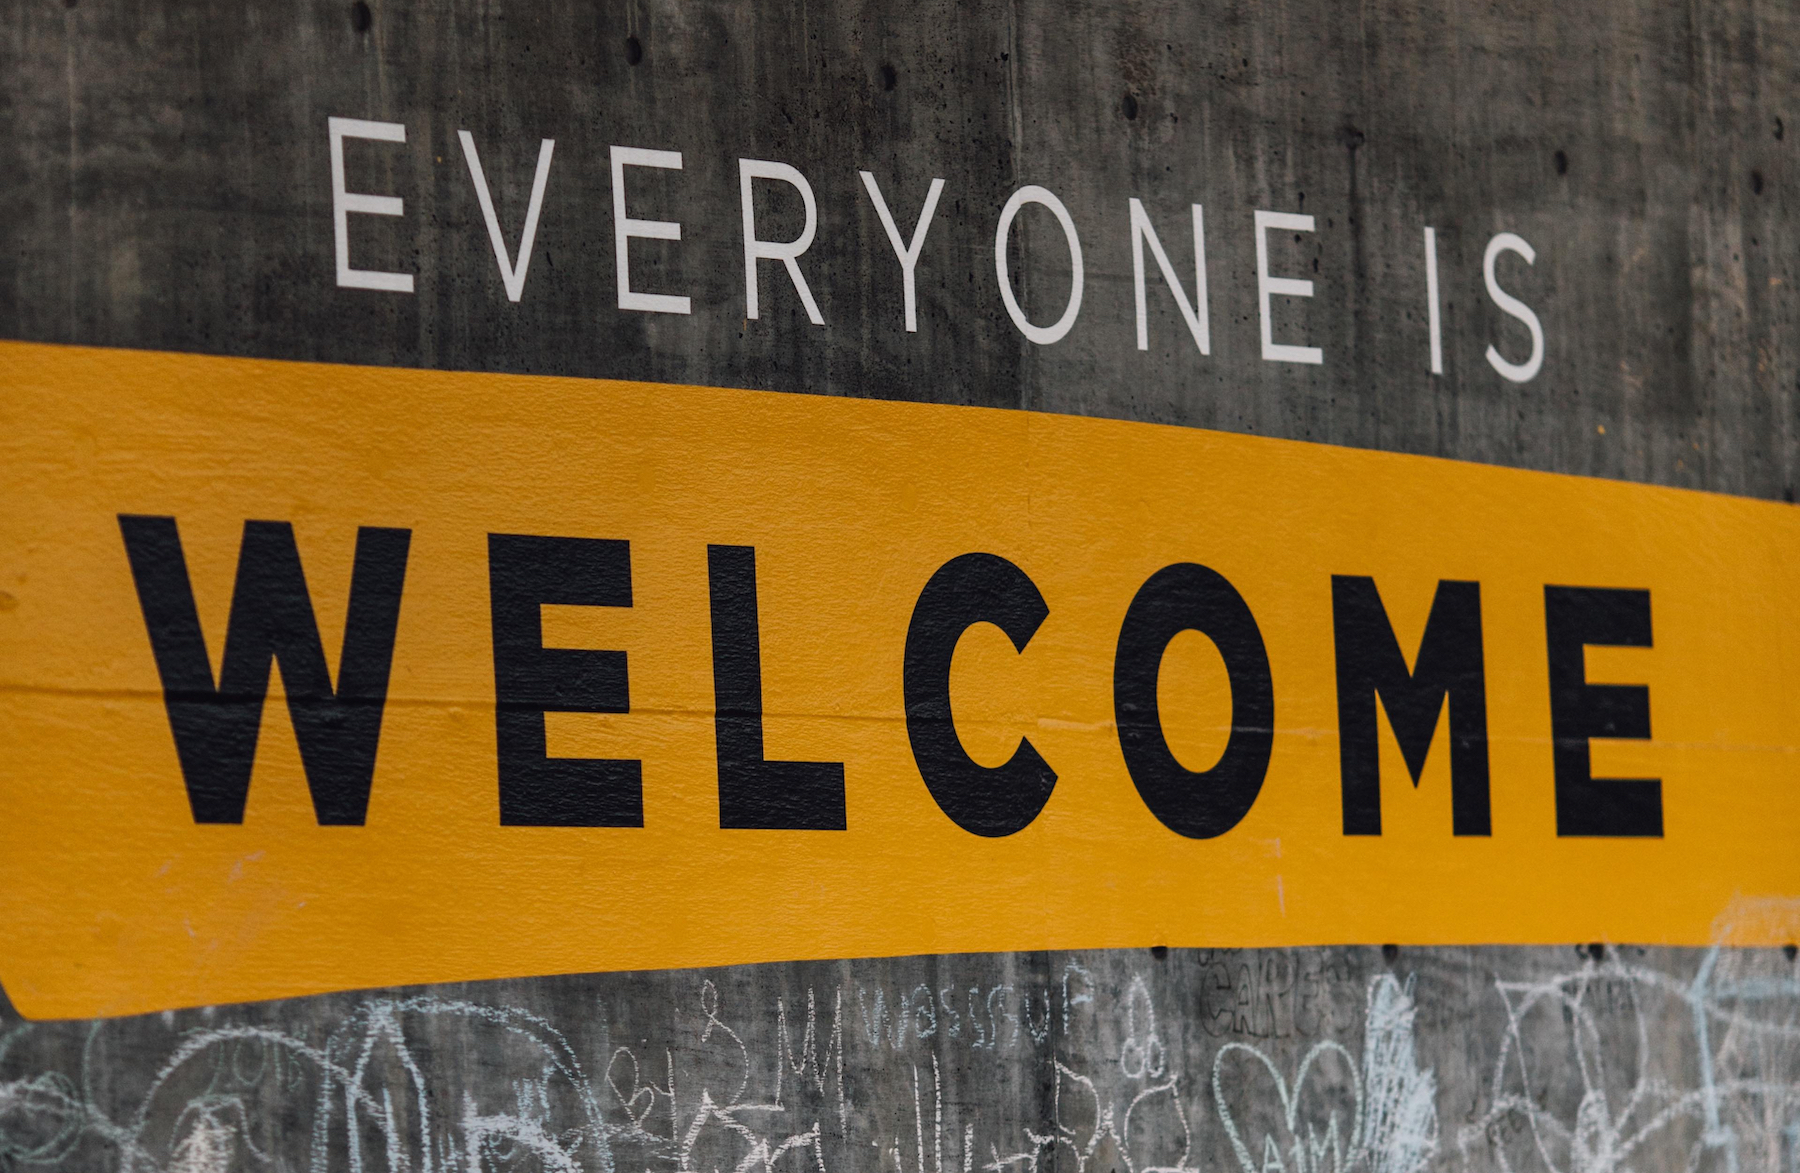 Street art on a concrete wall with words that read 'Everyone is Welcome.'